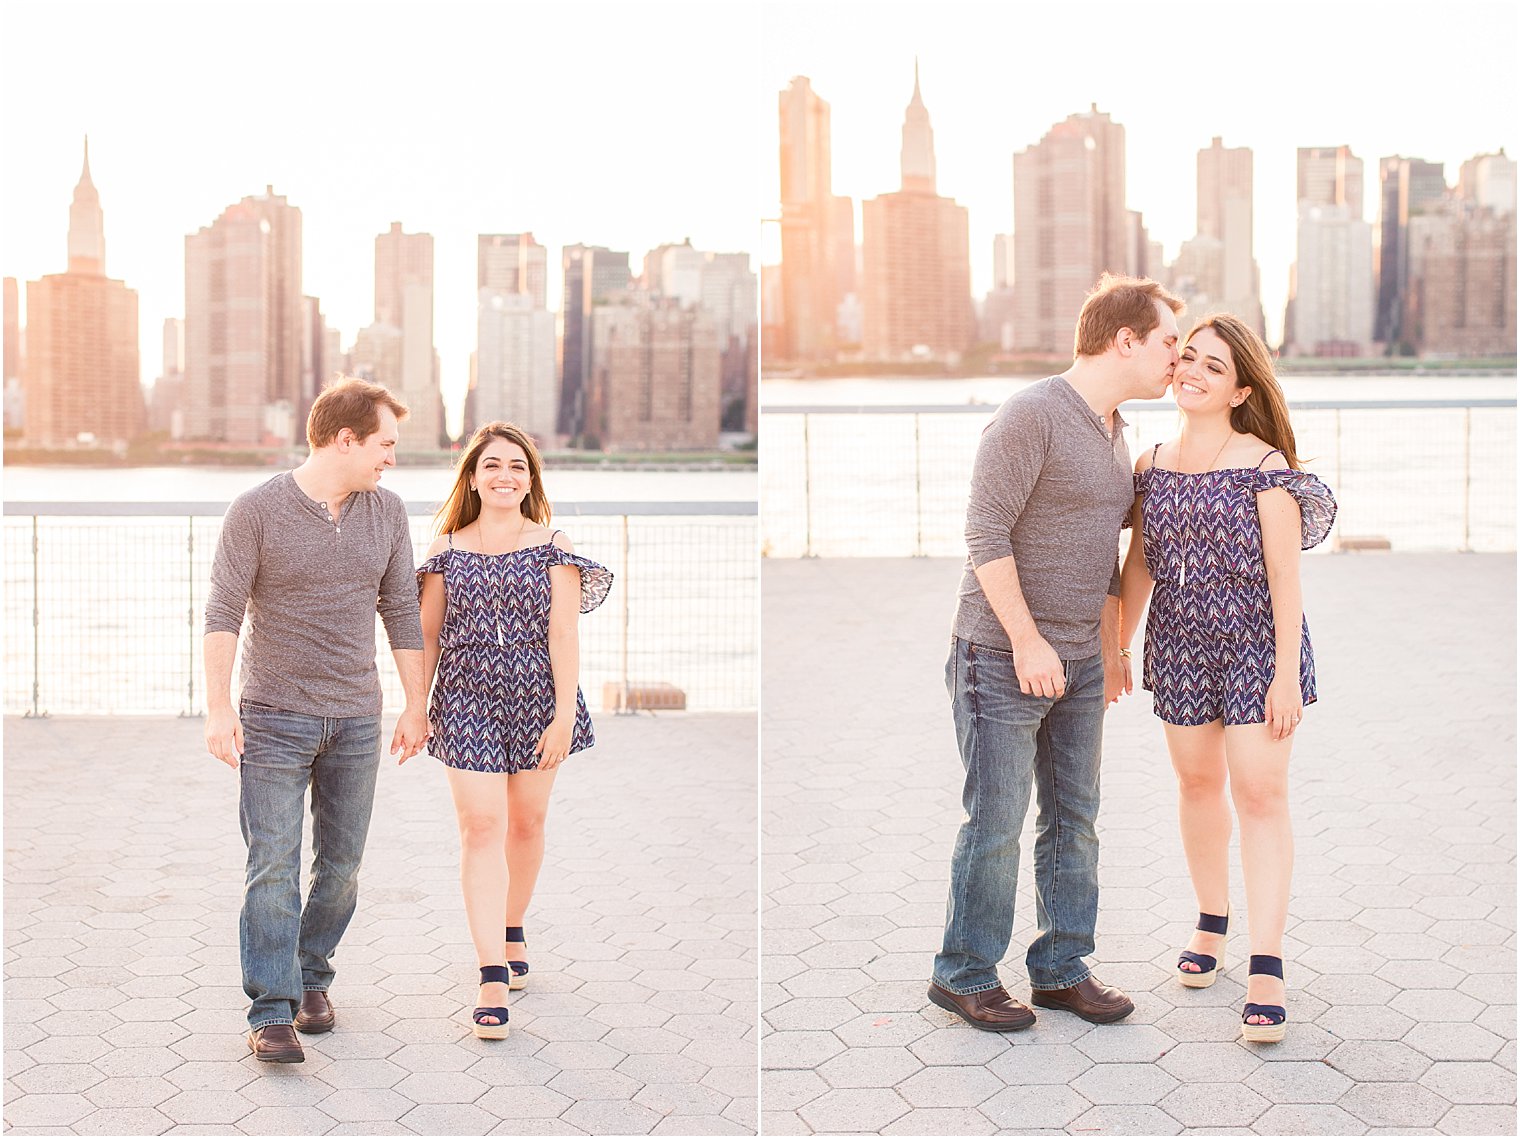 Pictures of couple in Long Island City, NY